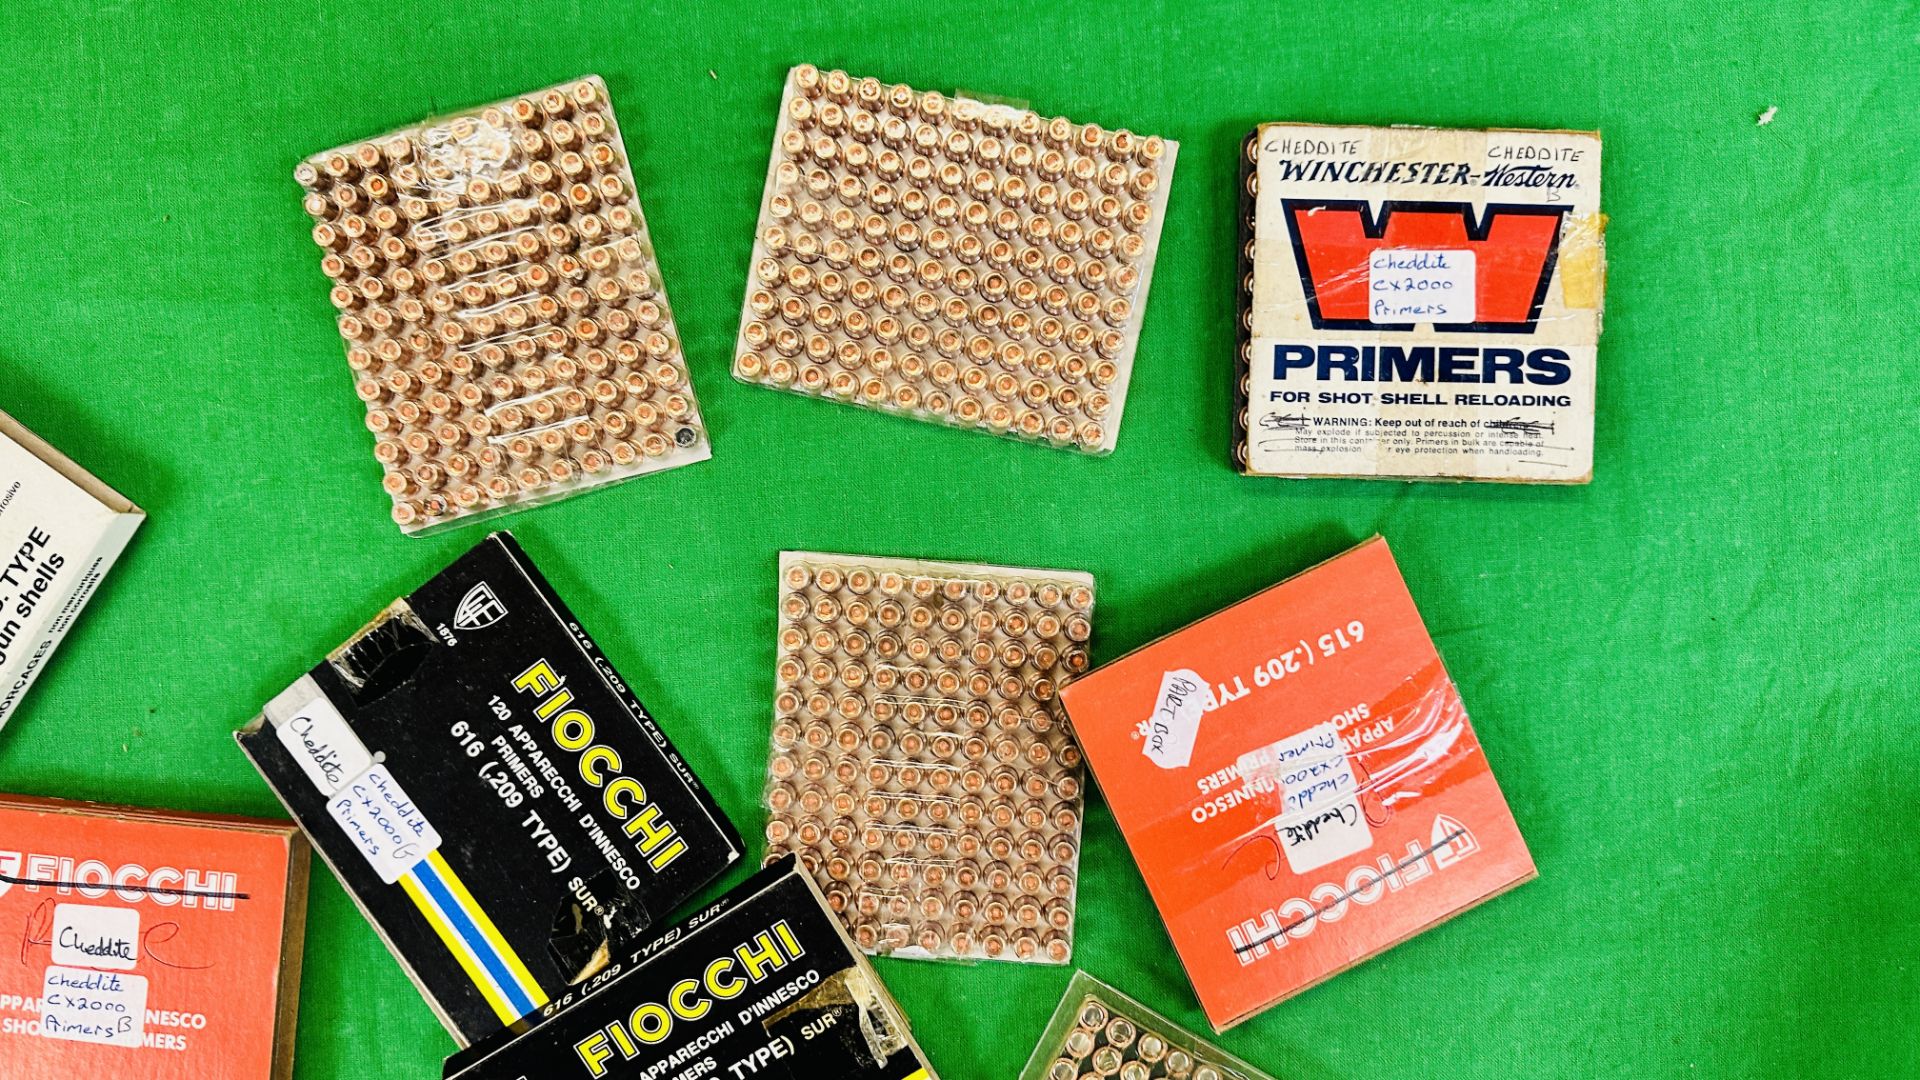 MIXED QUANTITY OF 209 PRIMERS INCLUDING CHEDDITE - (TO BE COLLECTED IN PERSON BY LICENCE HOLDER - Image 4 of 5